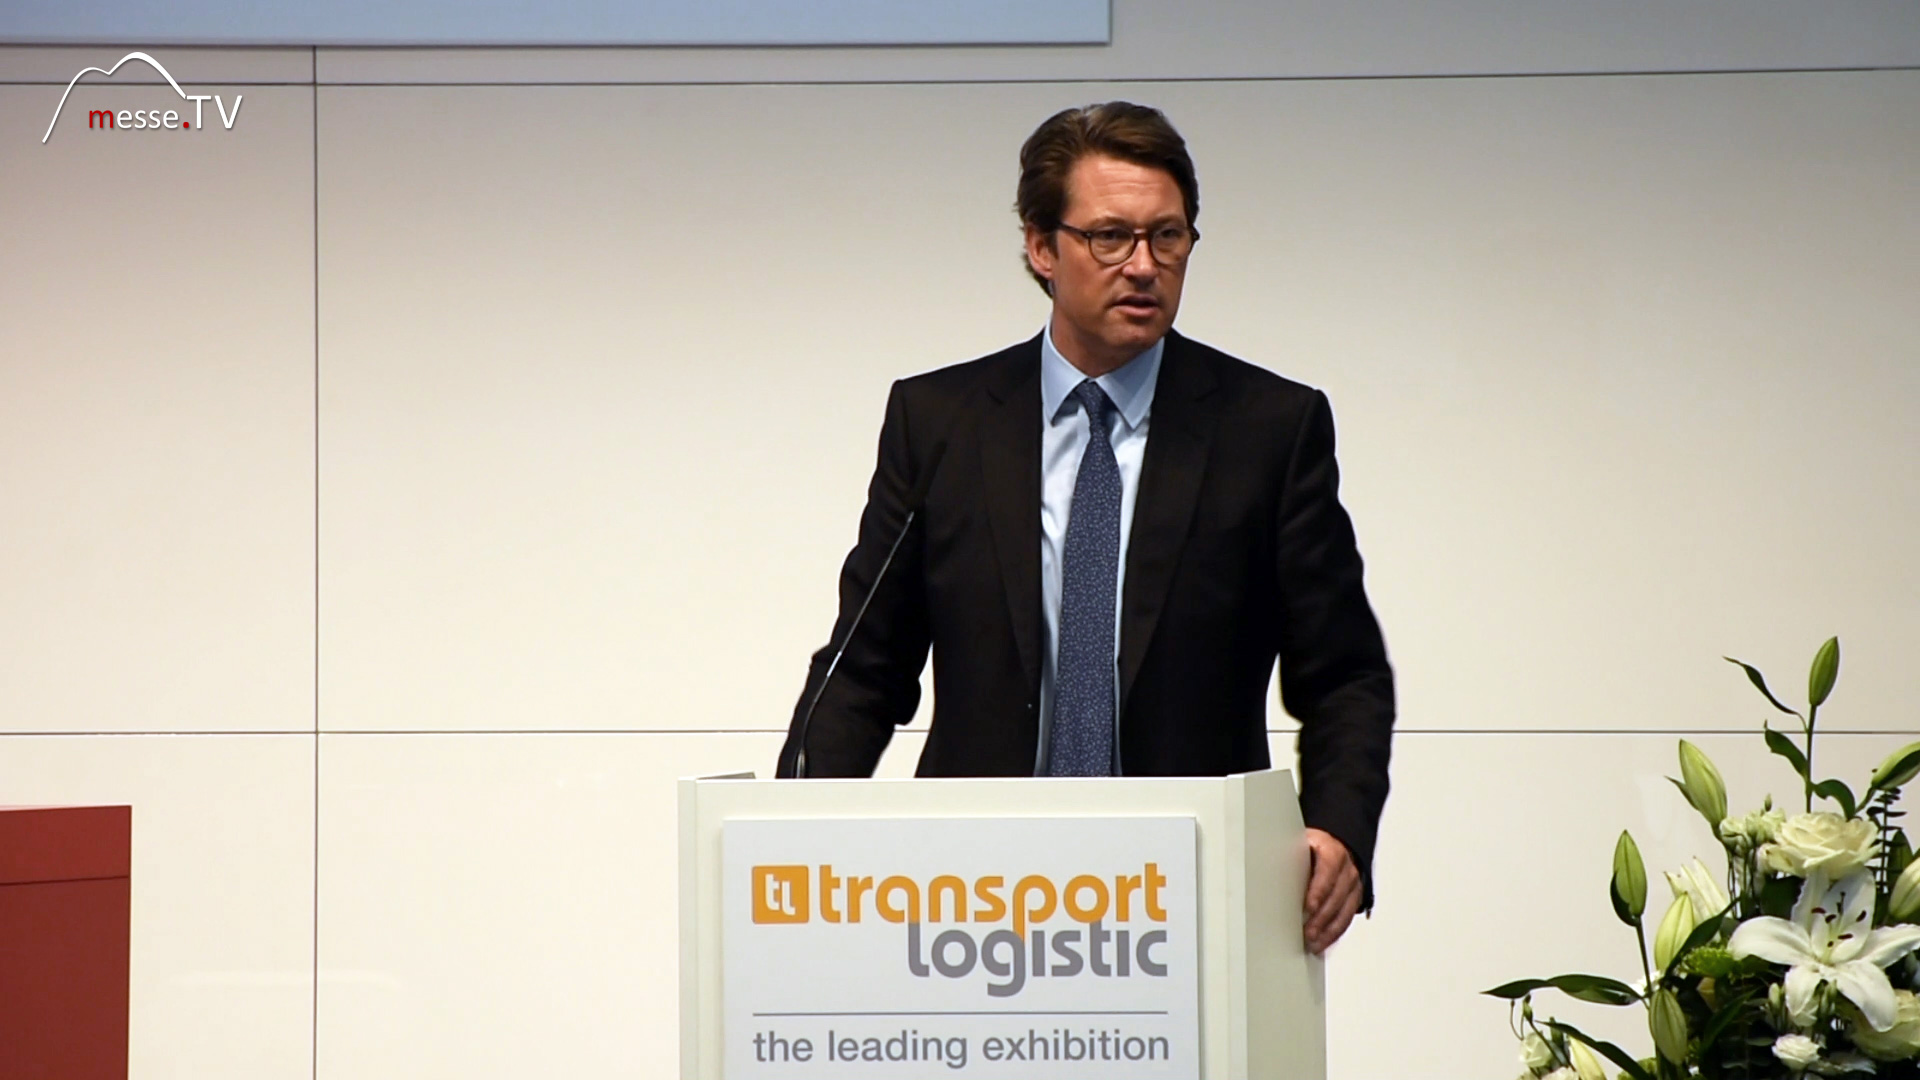 Andreas Scheuer Federal Minister for Transport and Digital Infrastructure